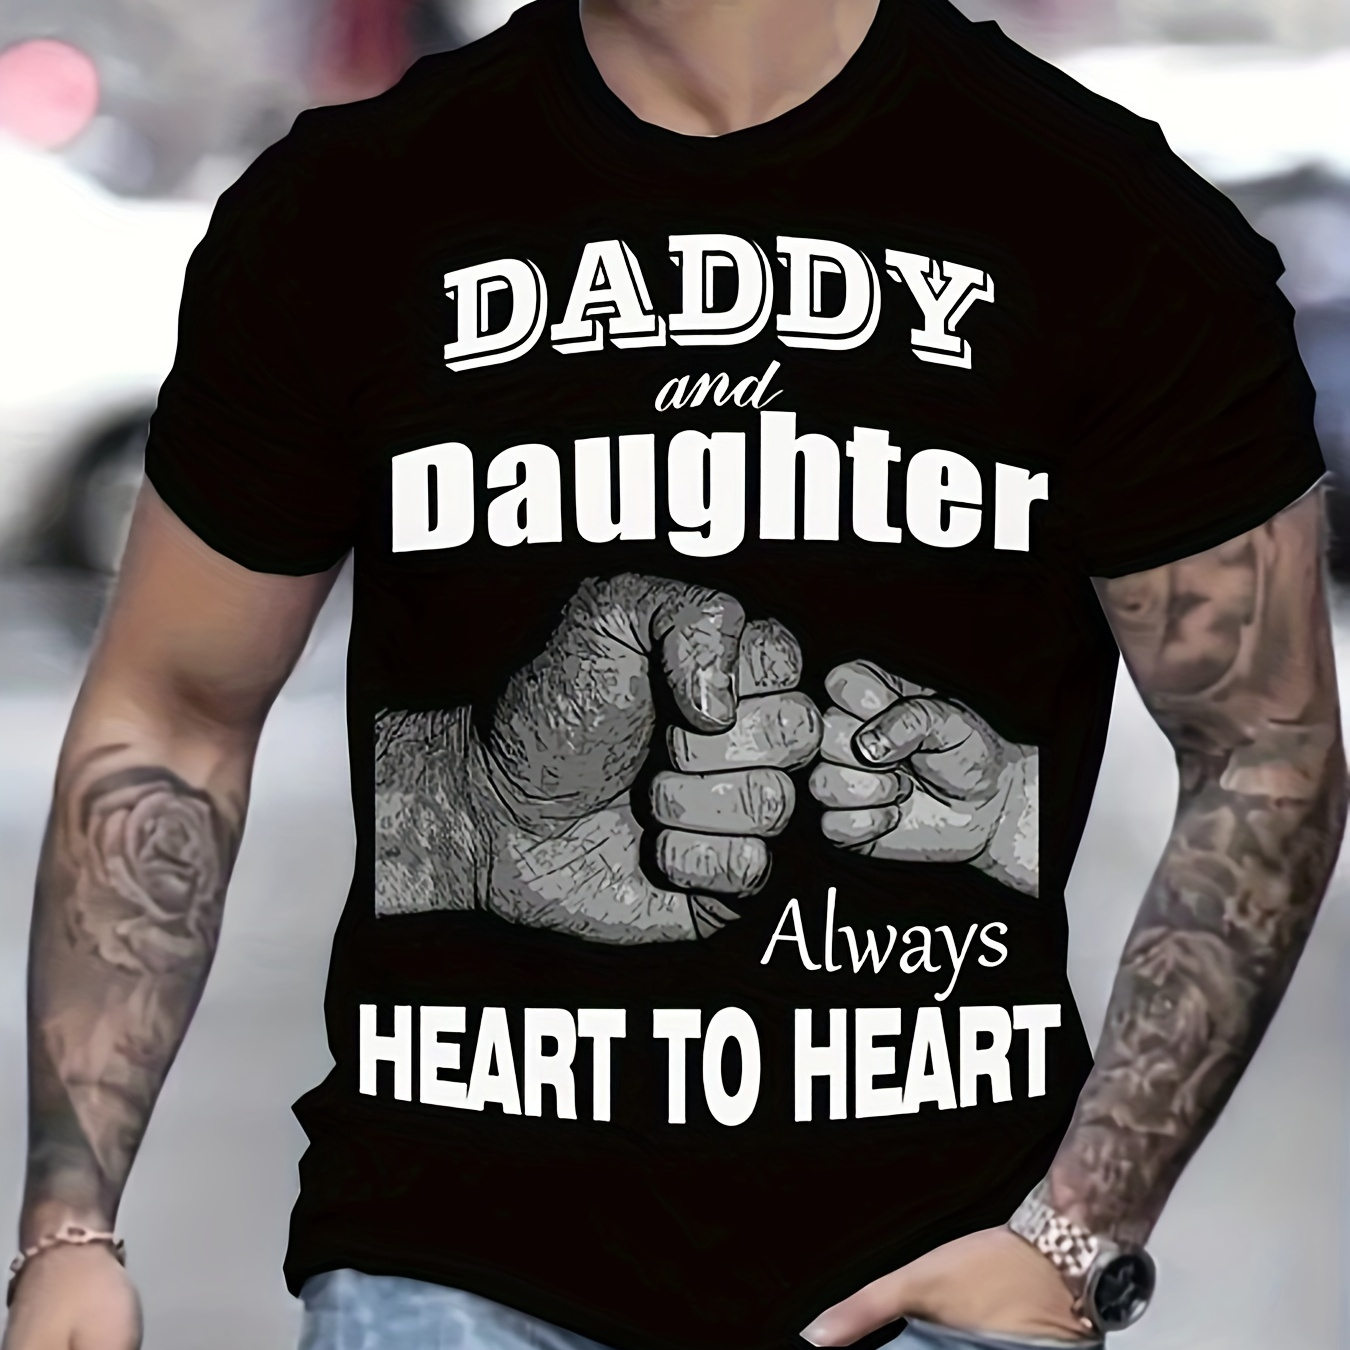 

''daddy And Daughter Always Heart To Heart'' Pattern Print Men's Short Sleeve Comfy T-shirt, Graphic Tee Men's Summer Clothes, Men's Clothing, Father's Day Gift